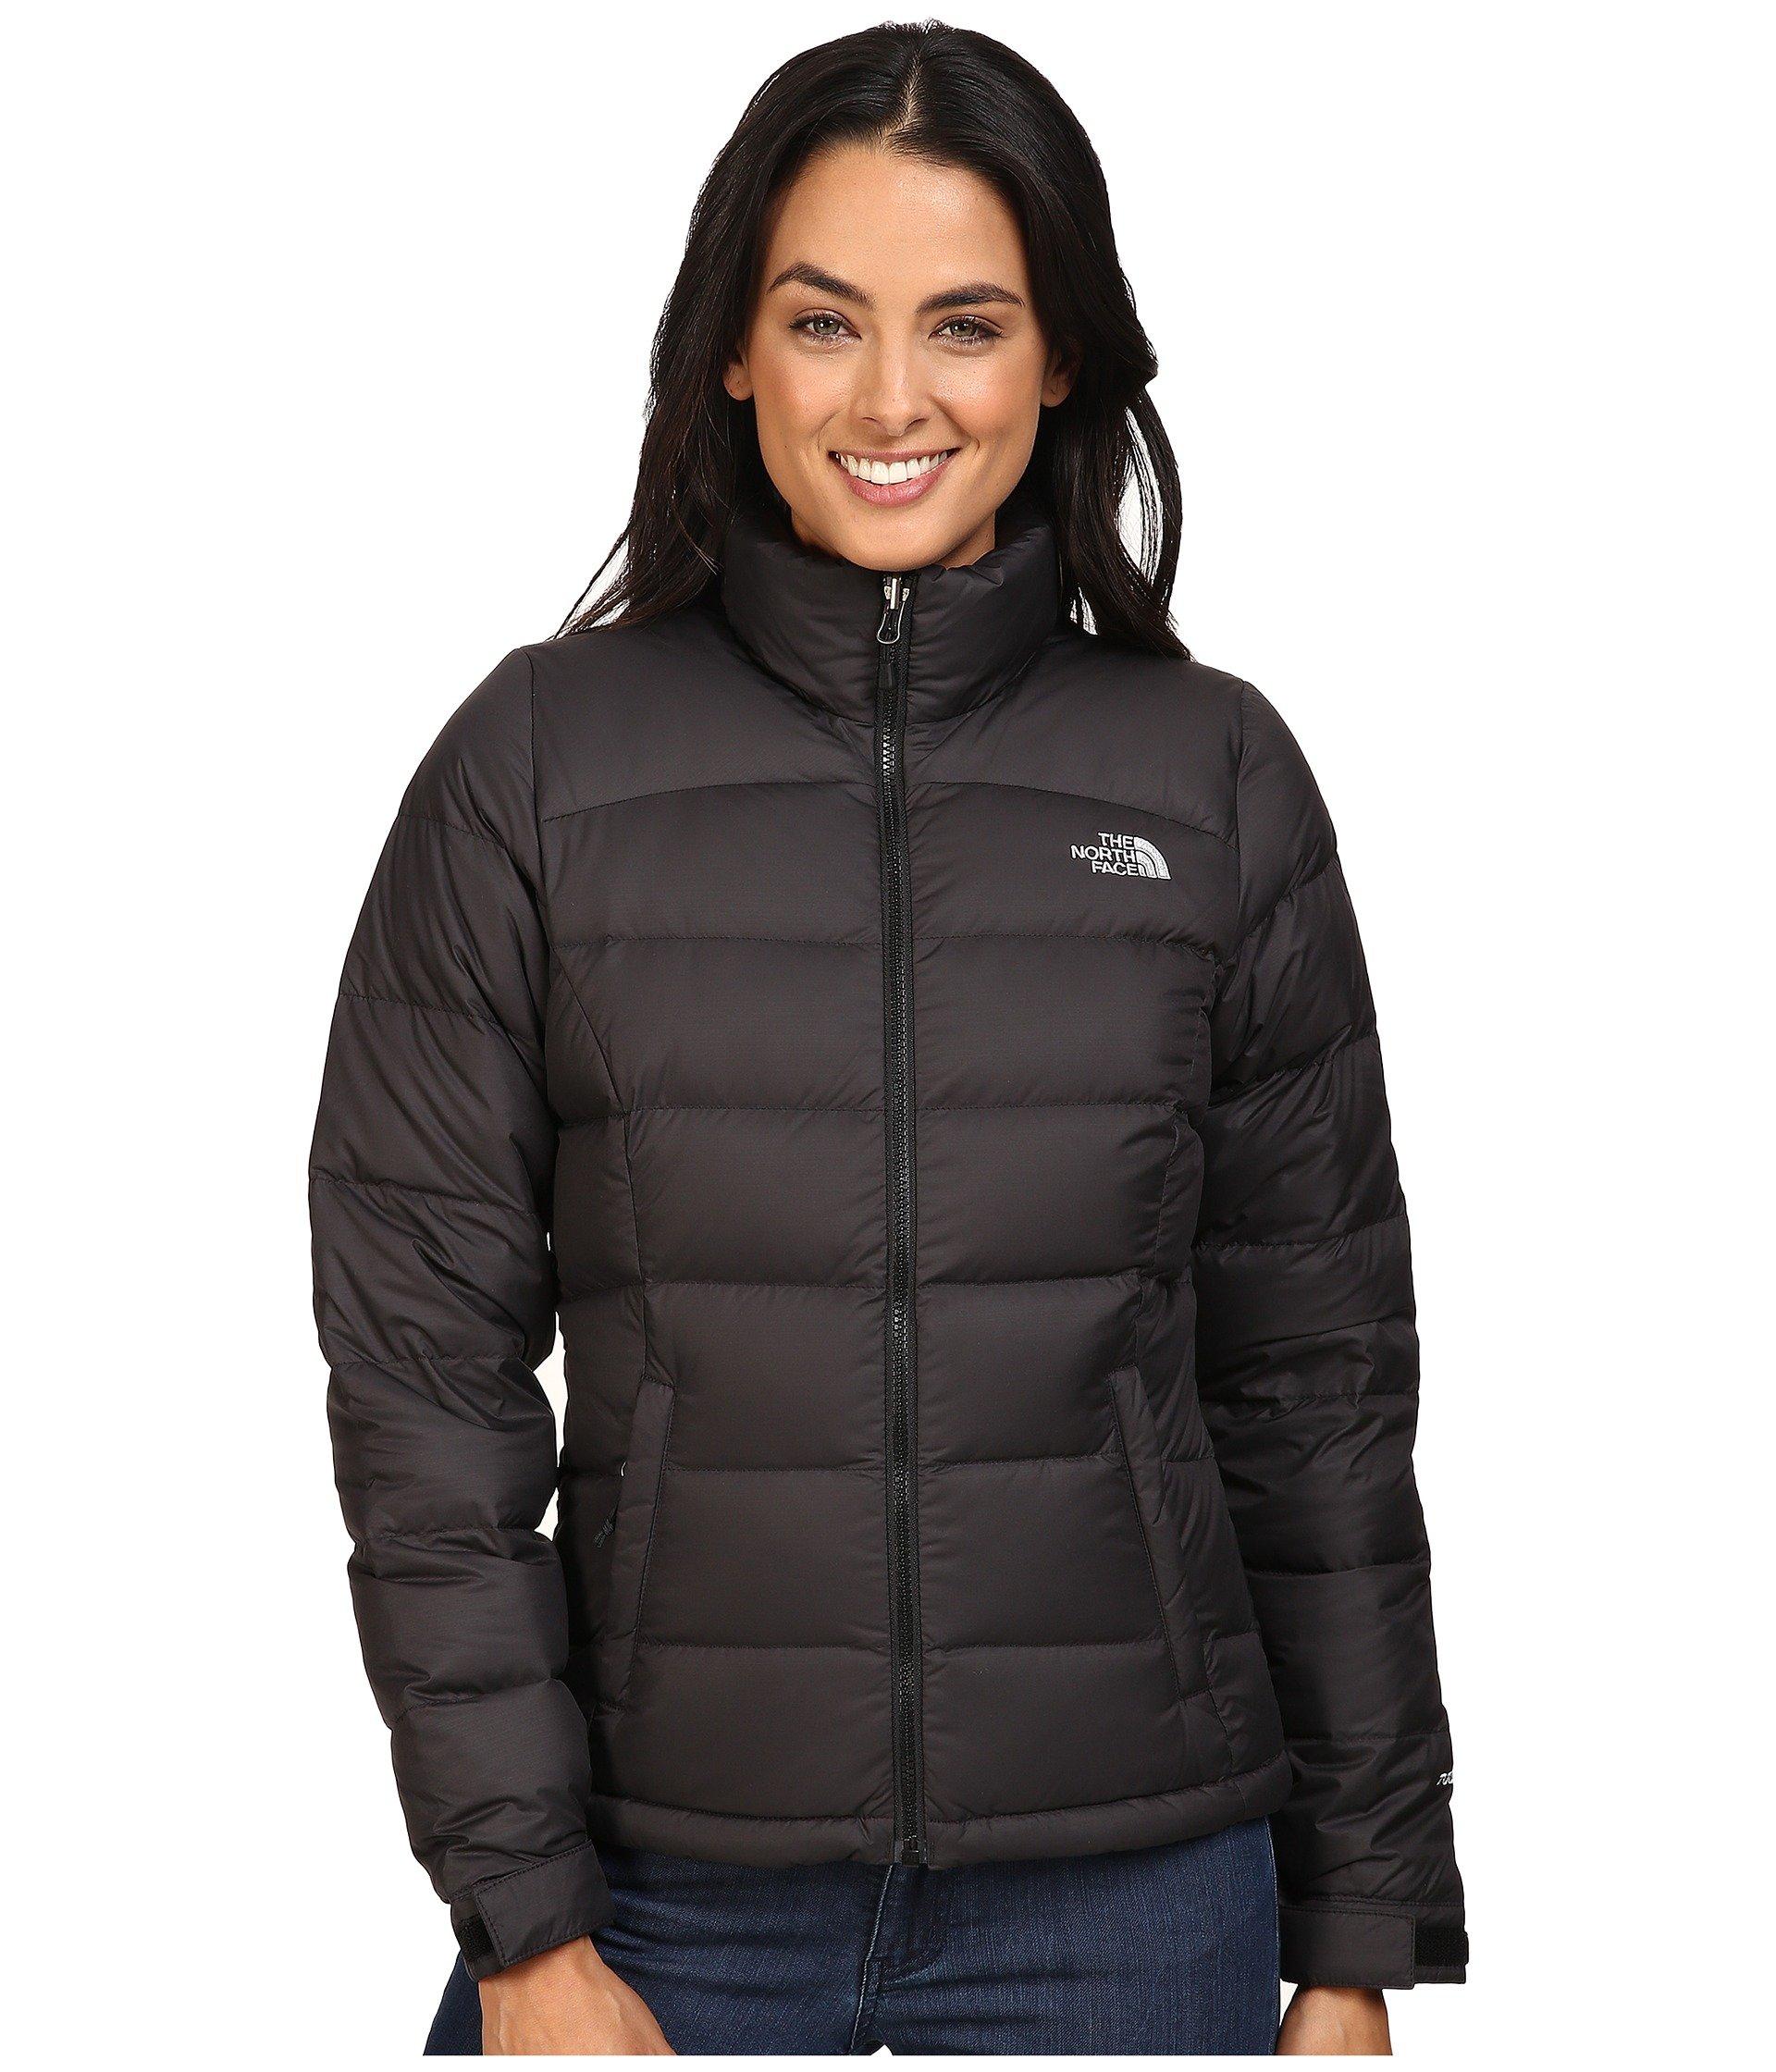 The North Face Nuptse 2 Jacket In Black SAVE 55% - mpgc.net